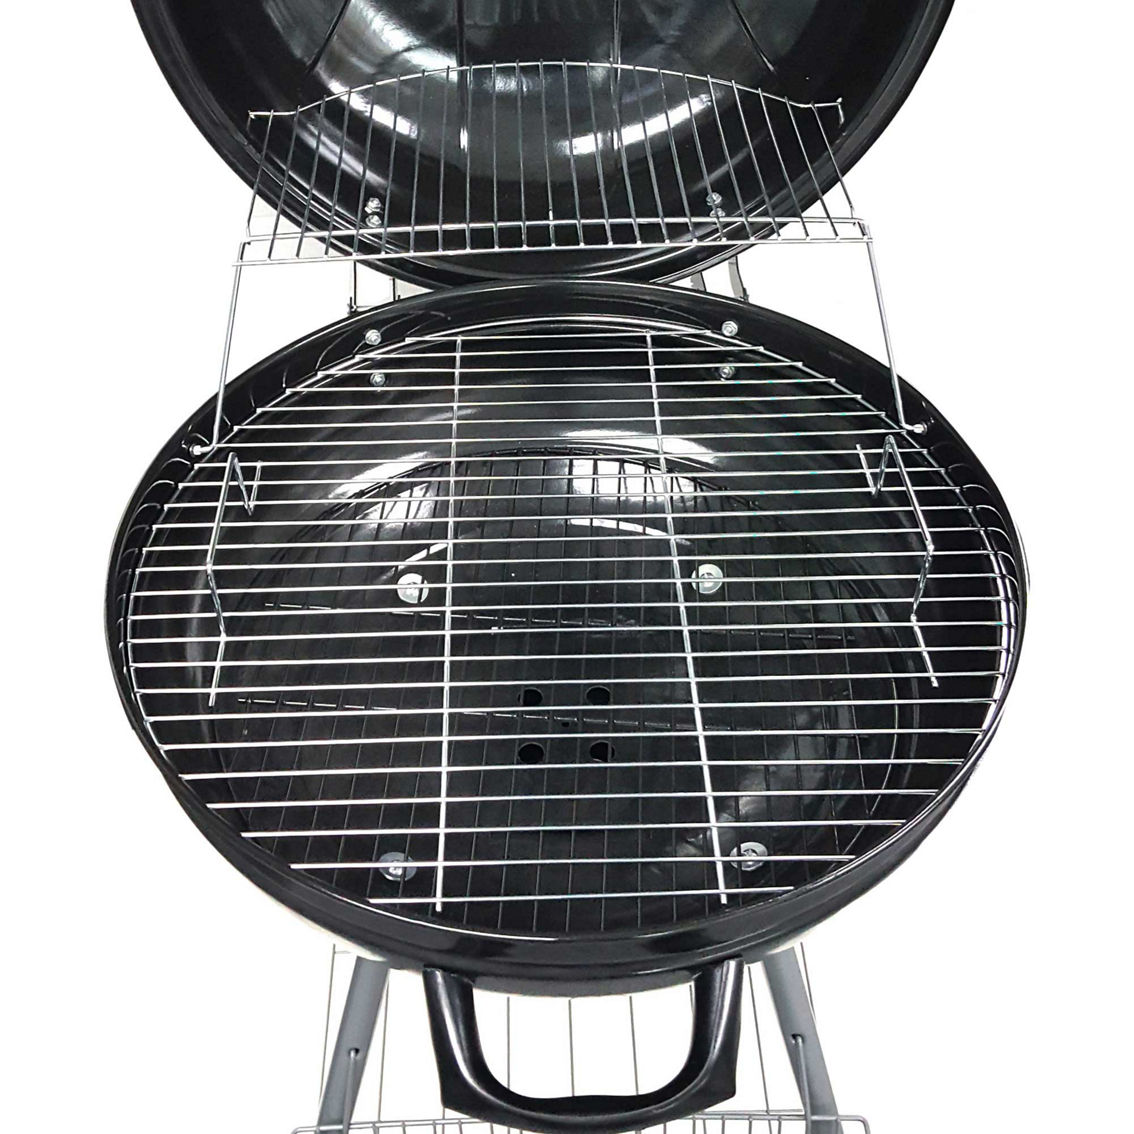 GrillSmith Pioneer 22.5 in. Charcoal Grill with Hinged Lid - Image 6 of 6